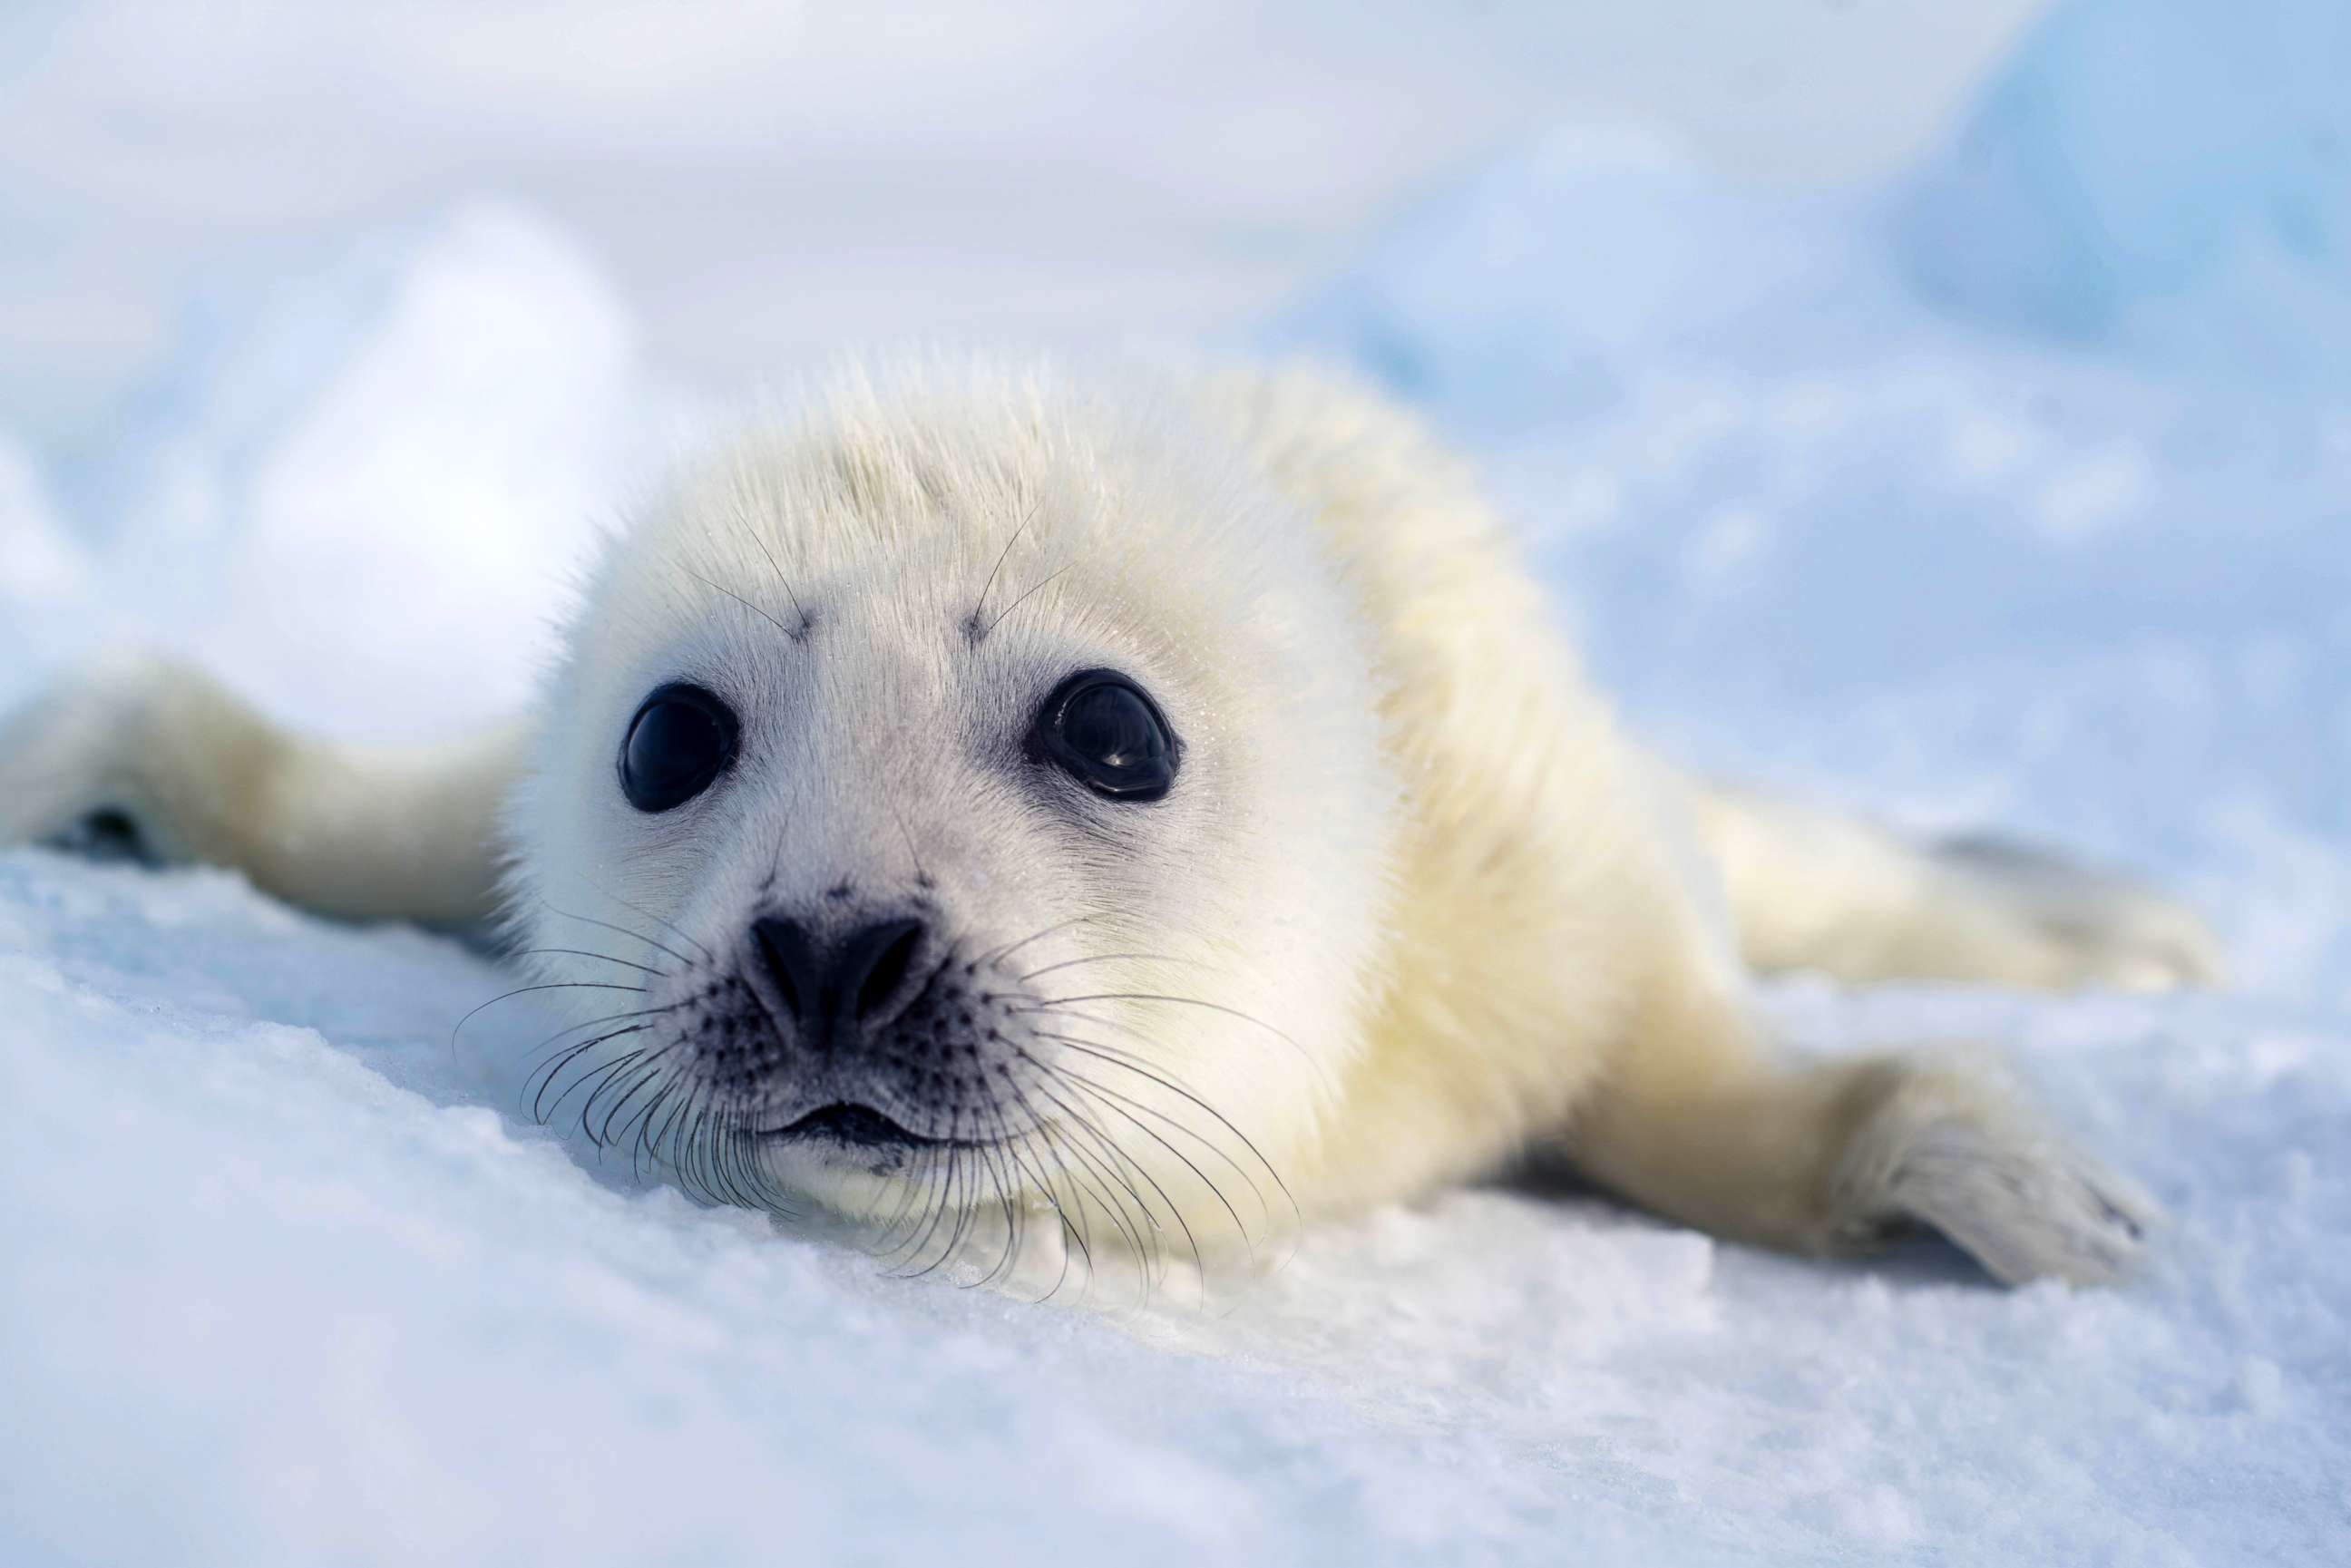 PHOTO: Closeup of a baby harp seal on an ice floe in the middle of the northwest Atlantic.